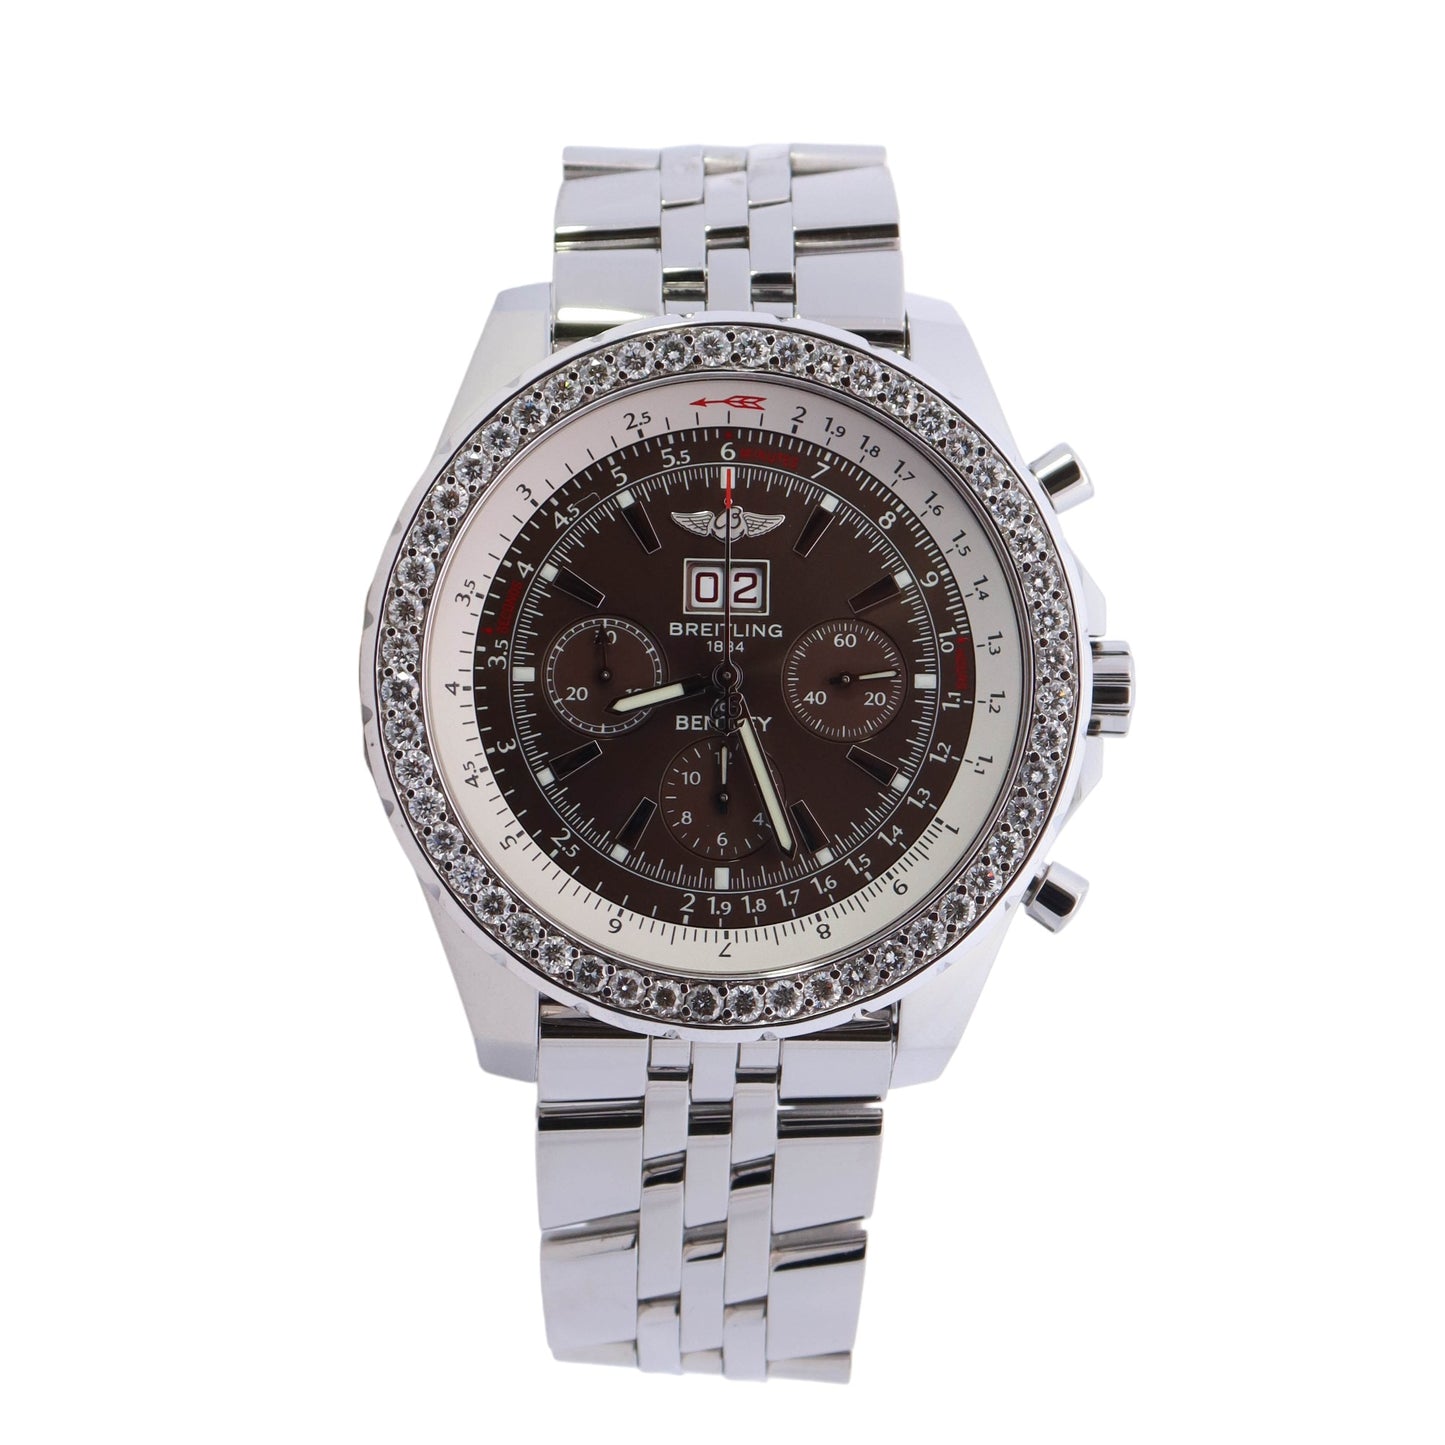 Breitling Bentley Stainless Steel 49mm Chocolate Brown Chrono Dial Watch Reference #: A44362